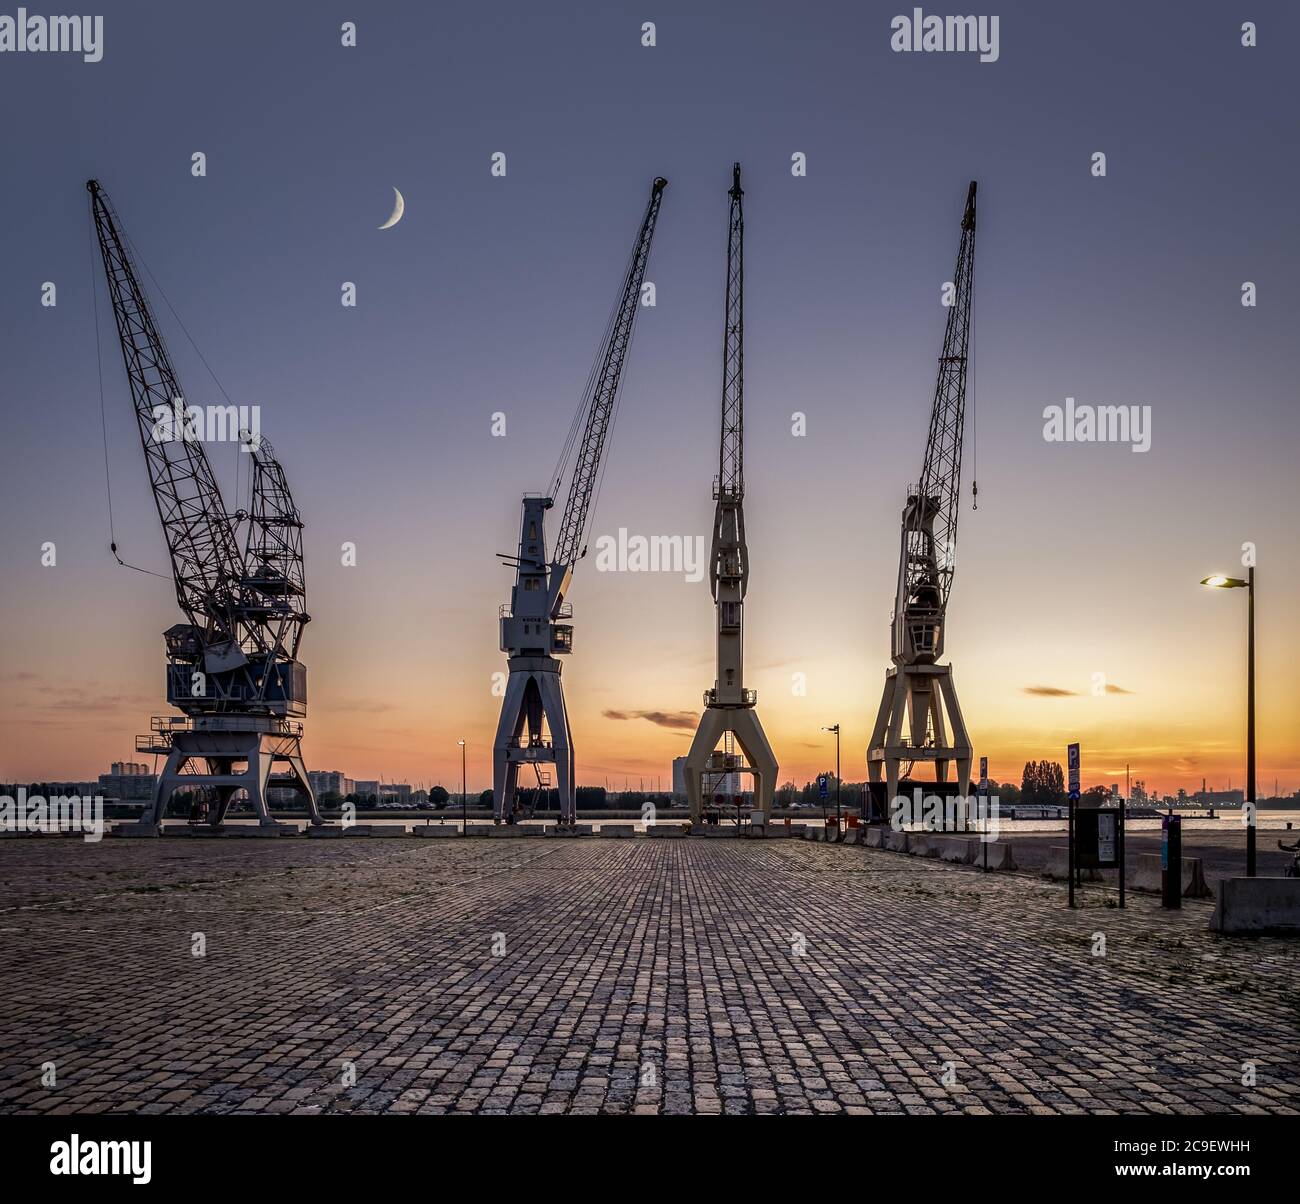 A row of 4 old harbor cranes in the city of Antwerp. Stock Photo